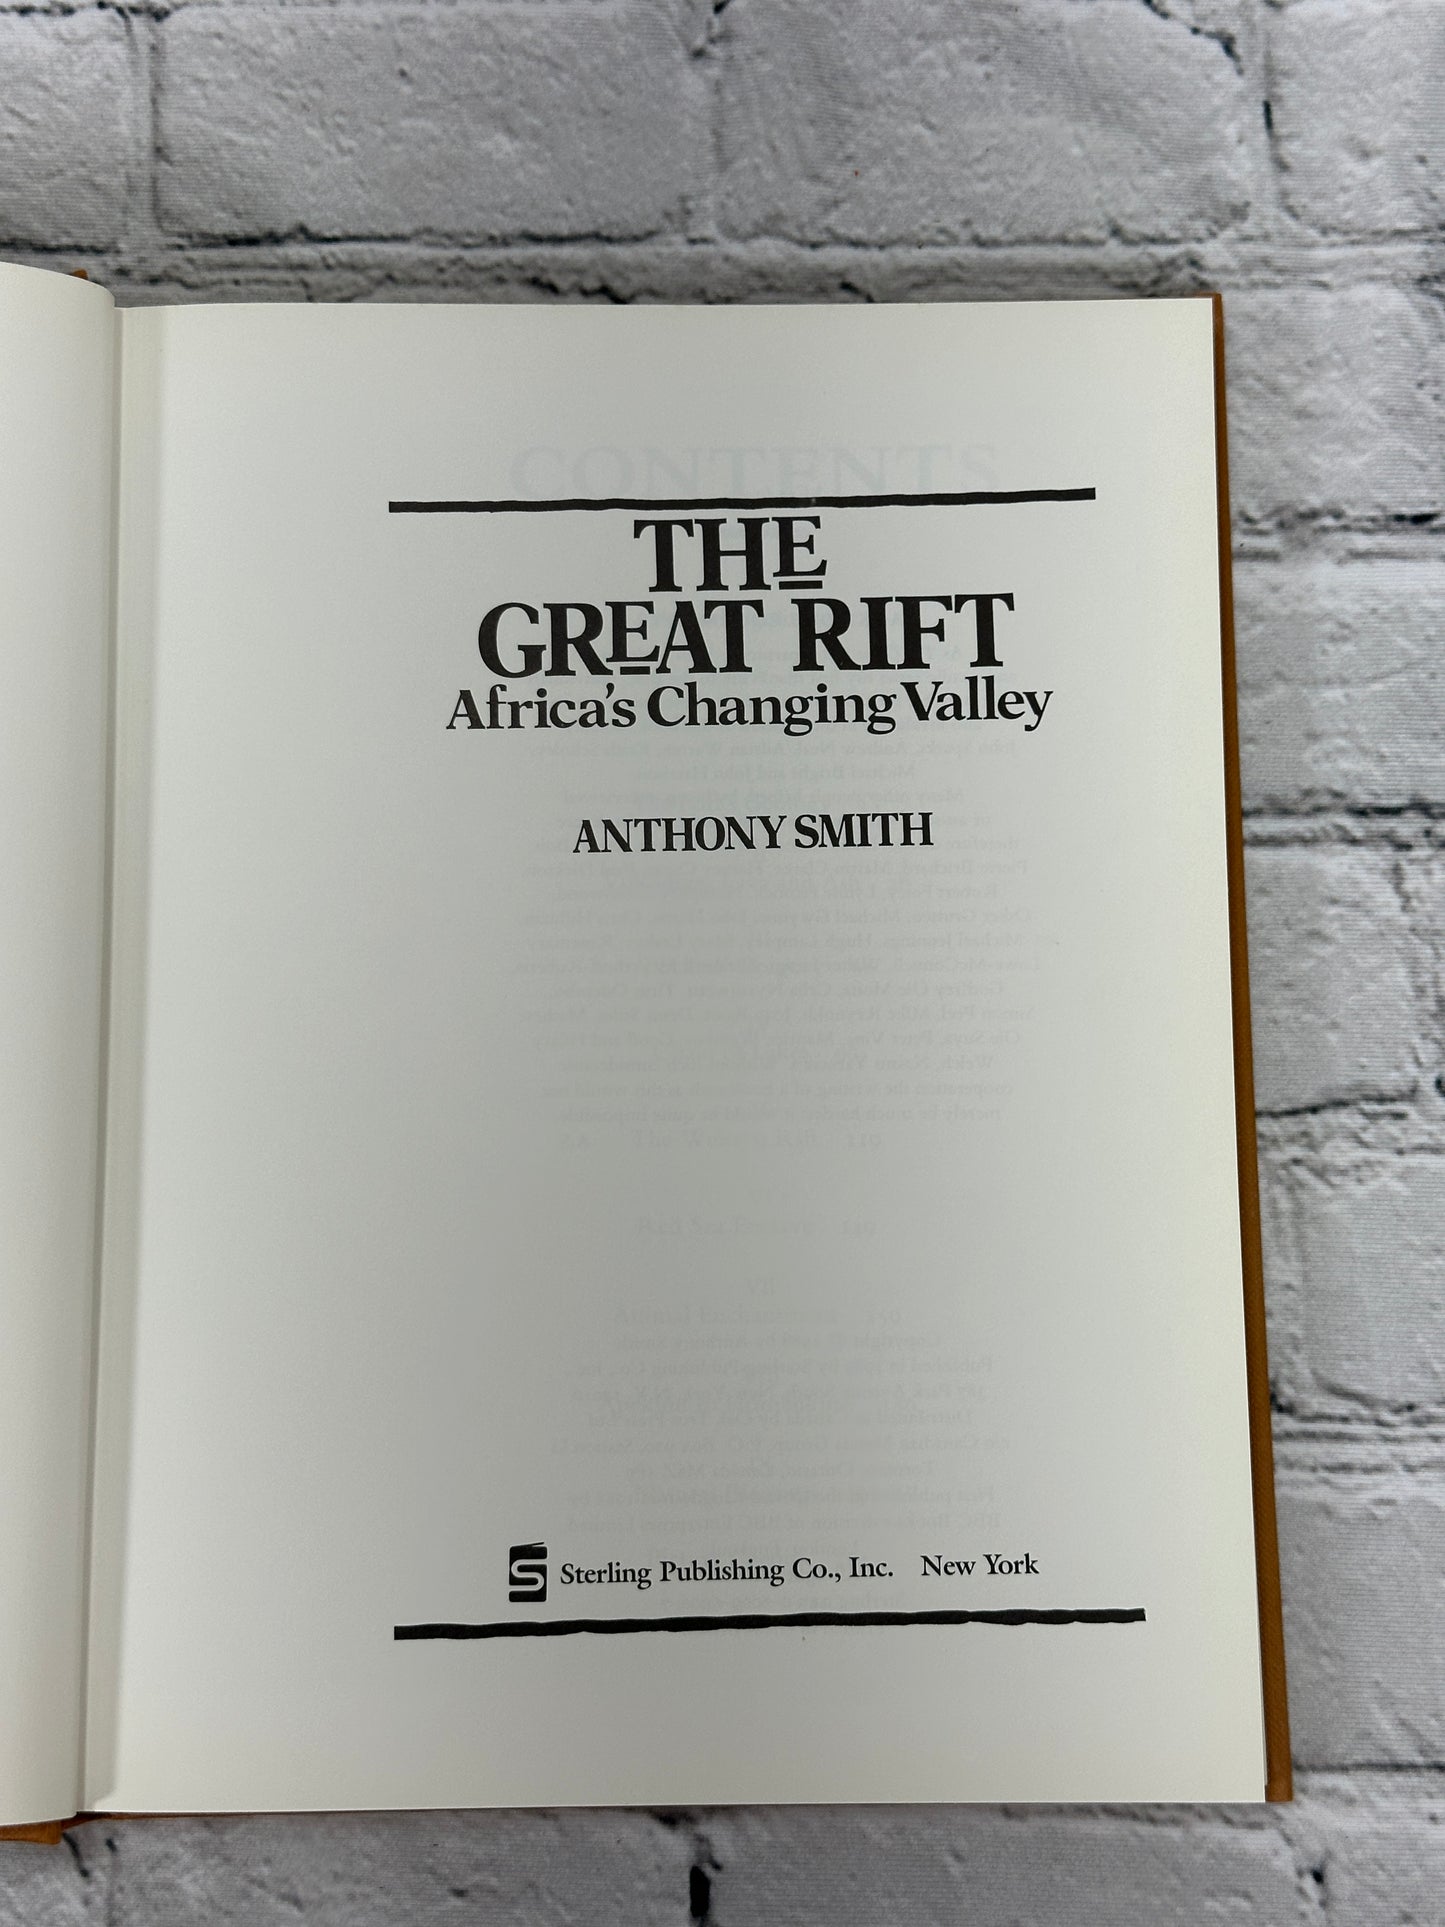 The Great Rift: Africa's Changing Valley By Anthony Smith [1988]